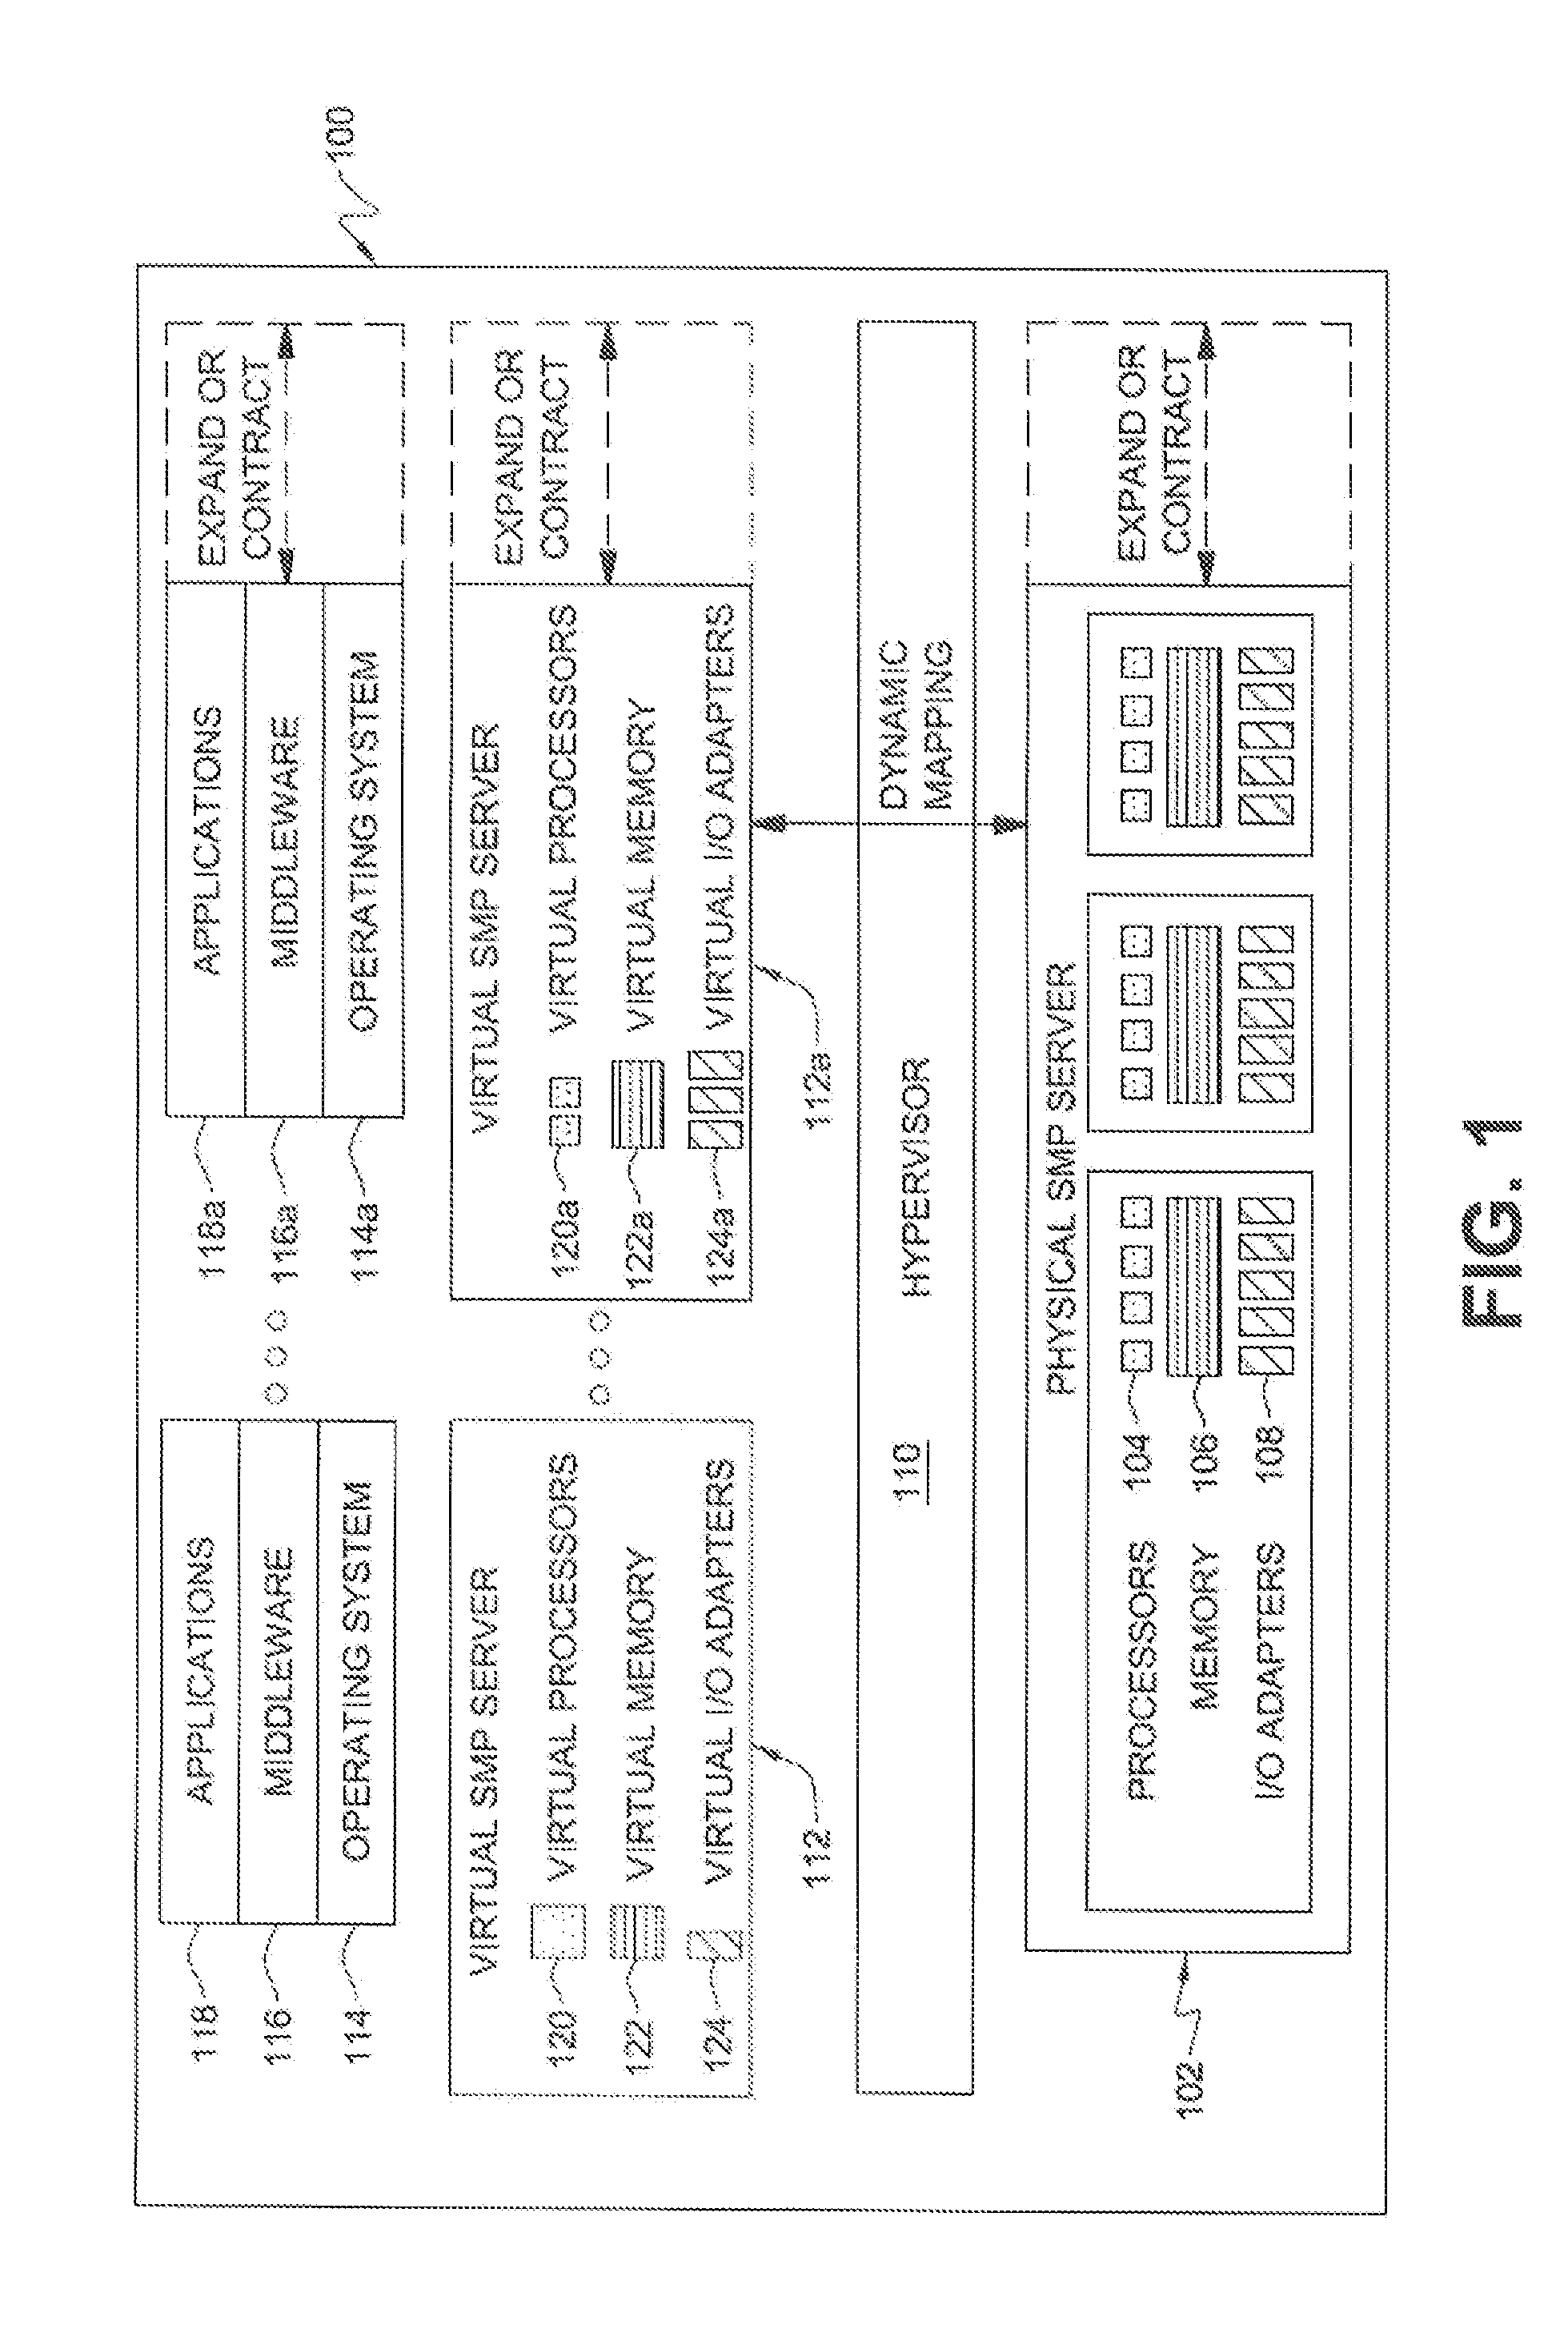 Virtualization of vendor specific configuration and management of self-virtualizing input/output device